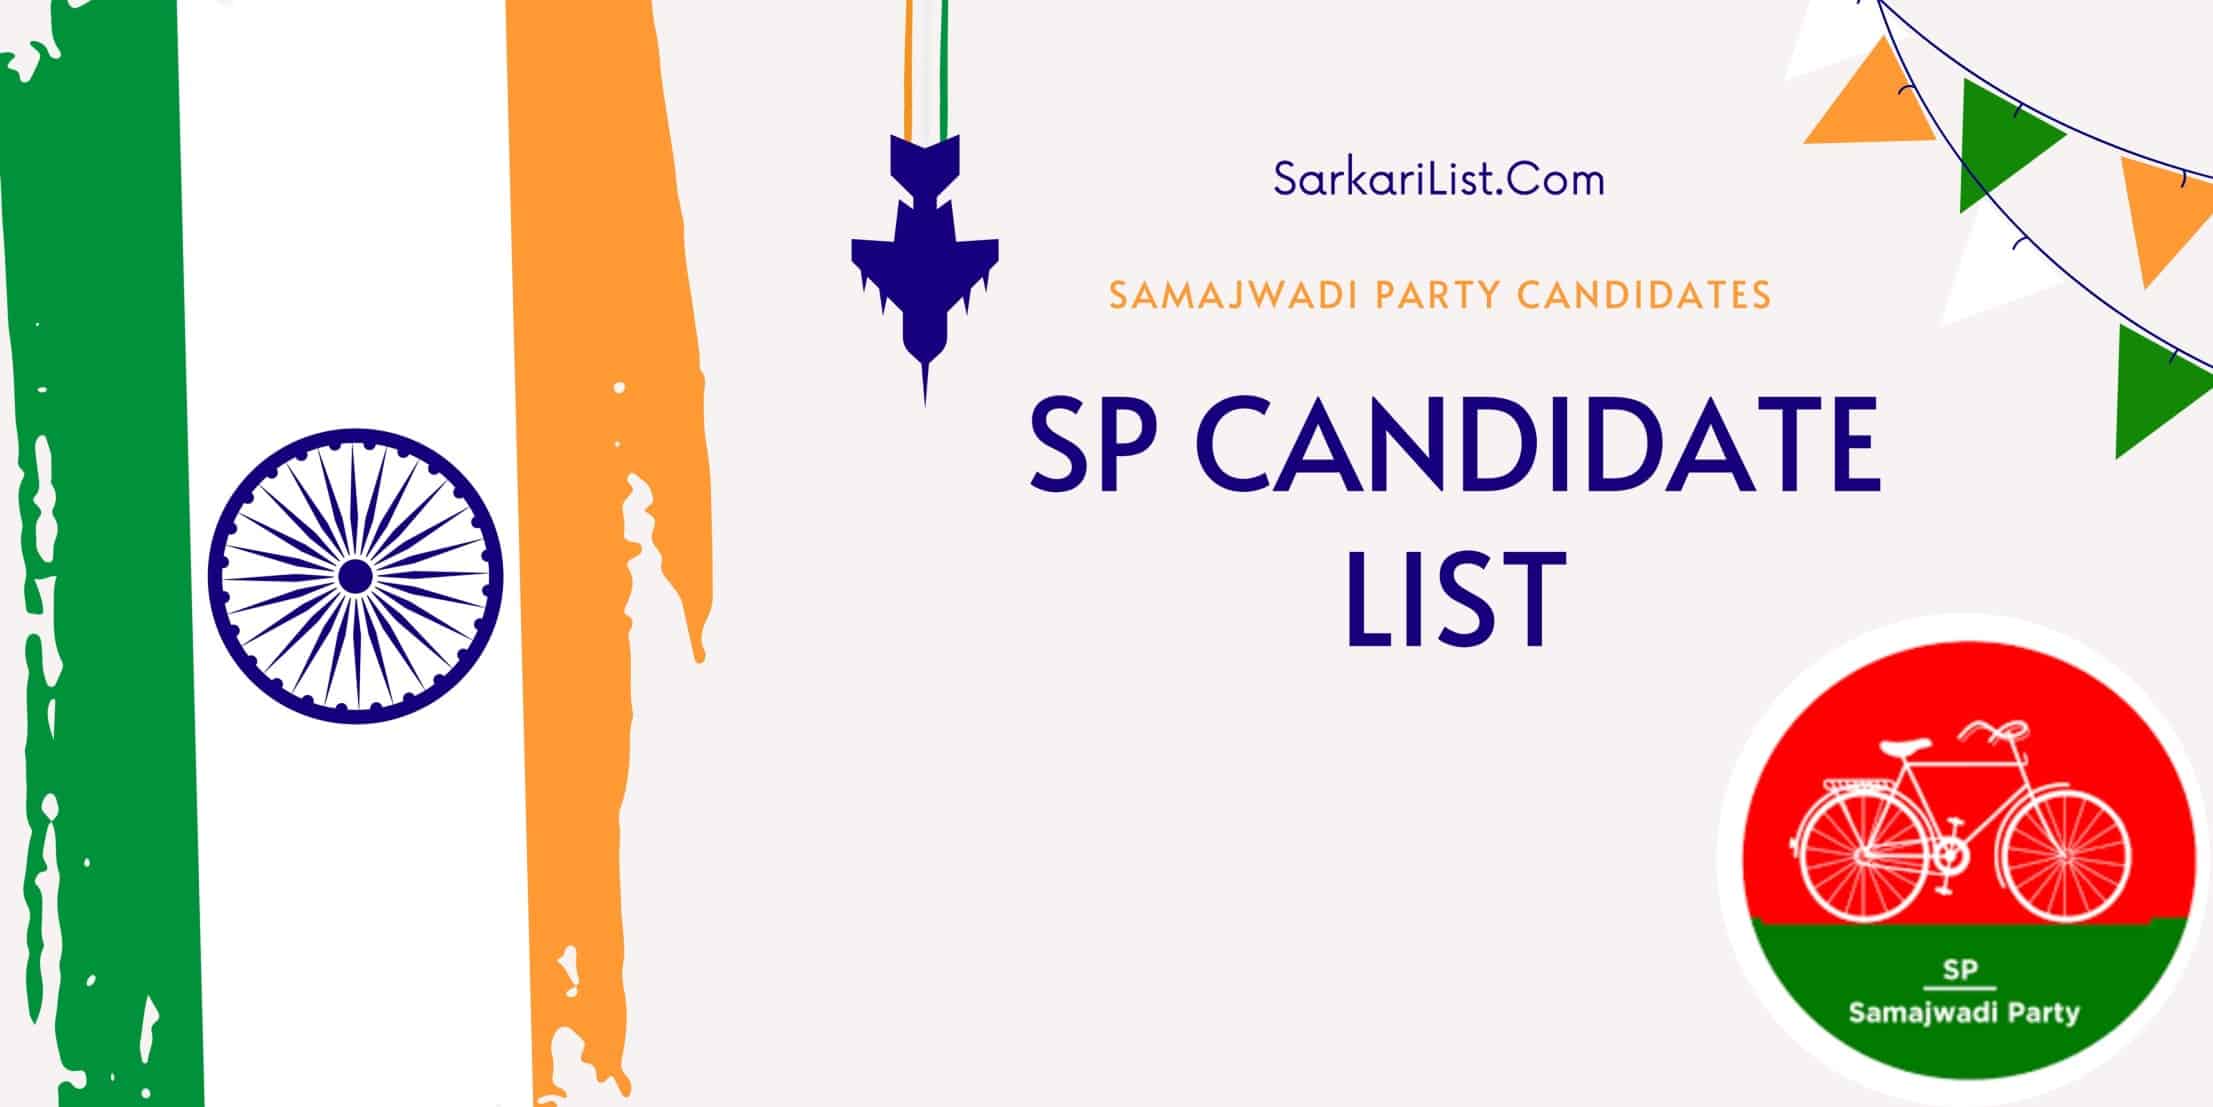 SP Candidate List 